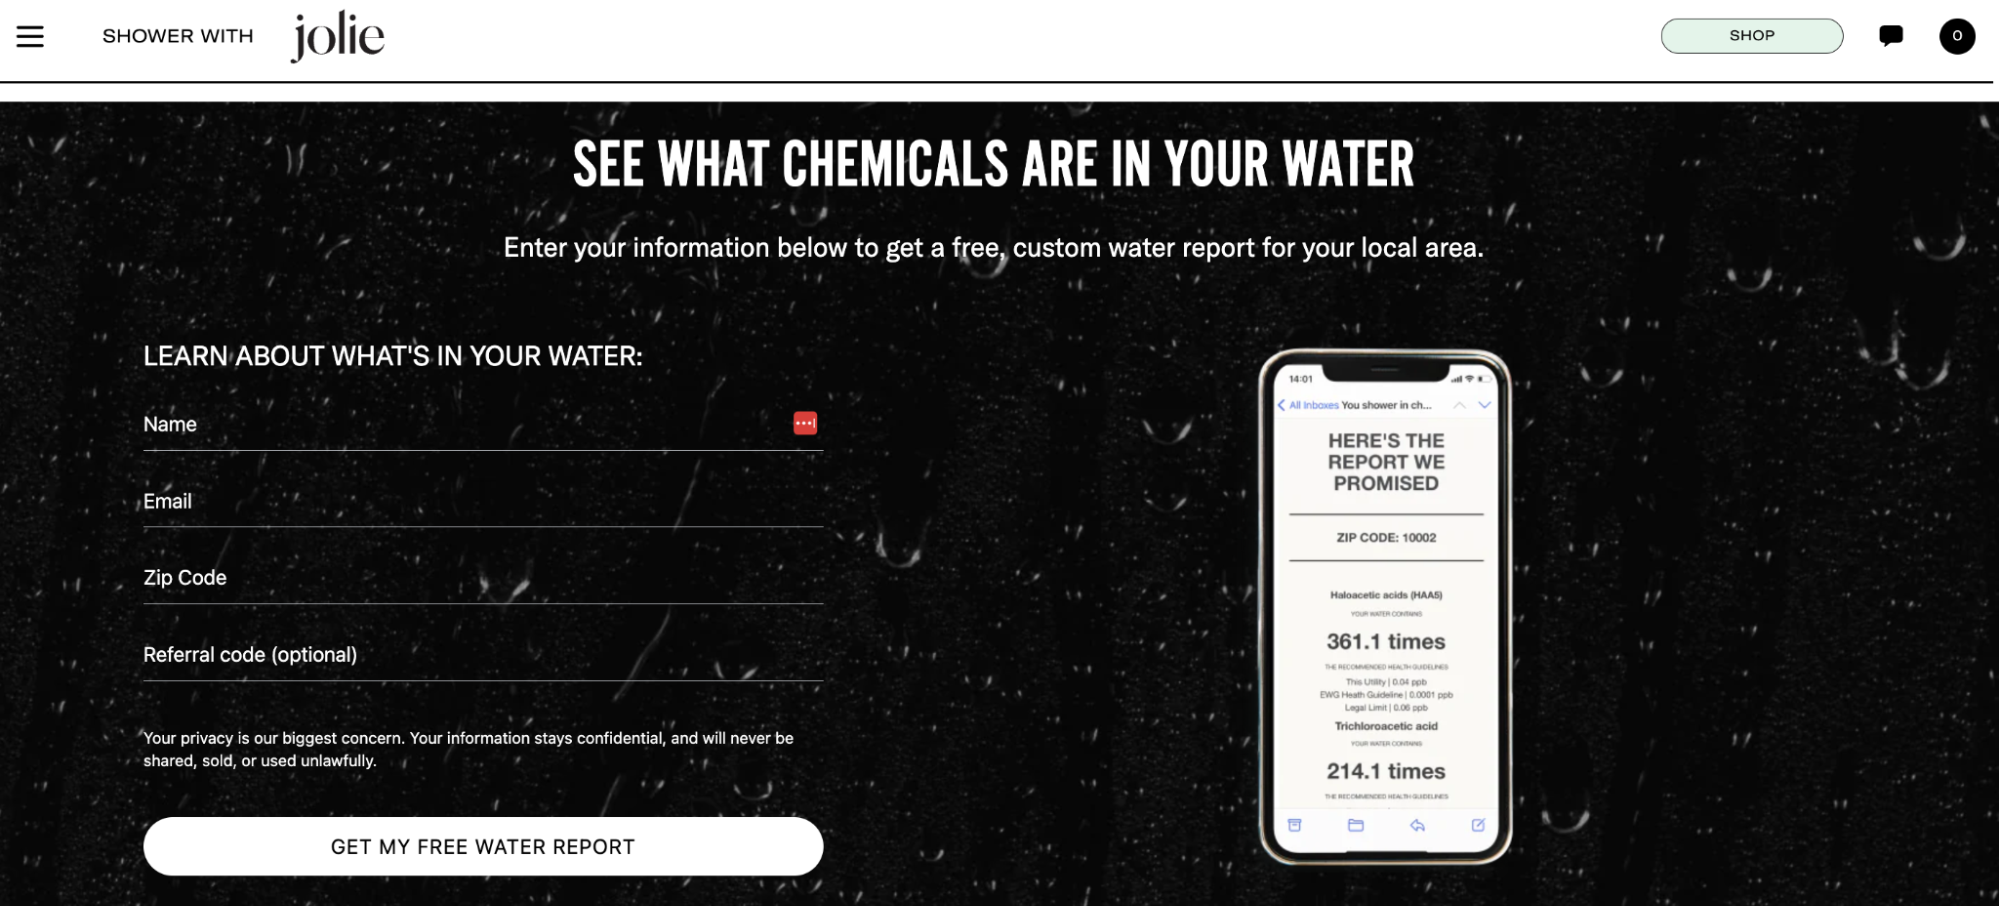 Landing page for Jolie’s water report.